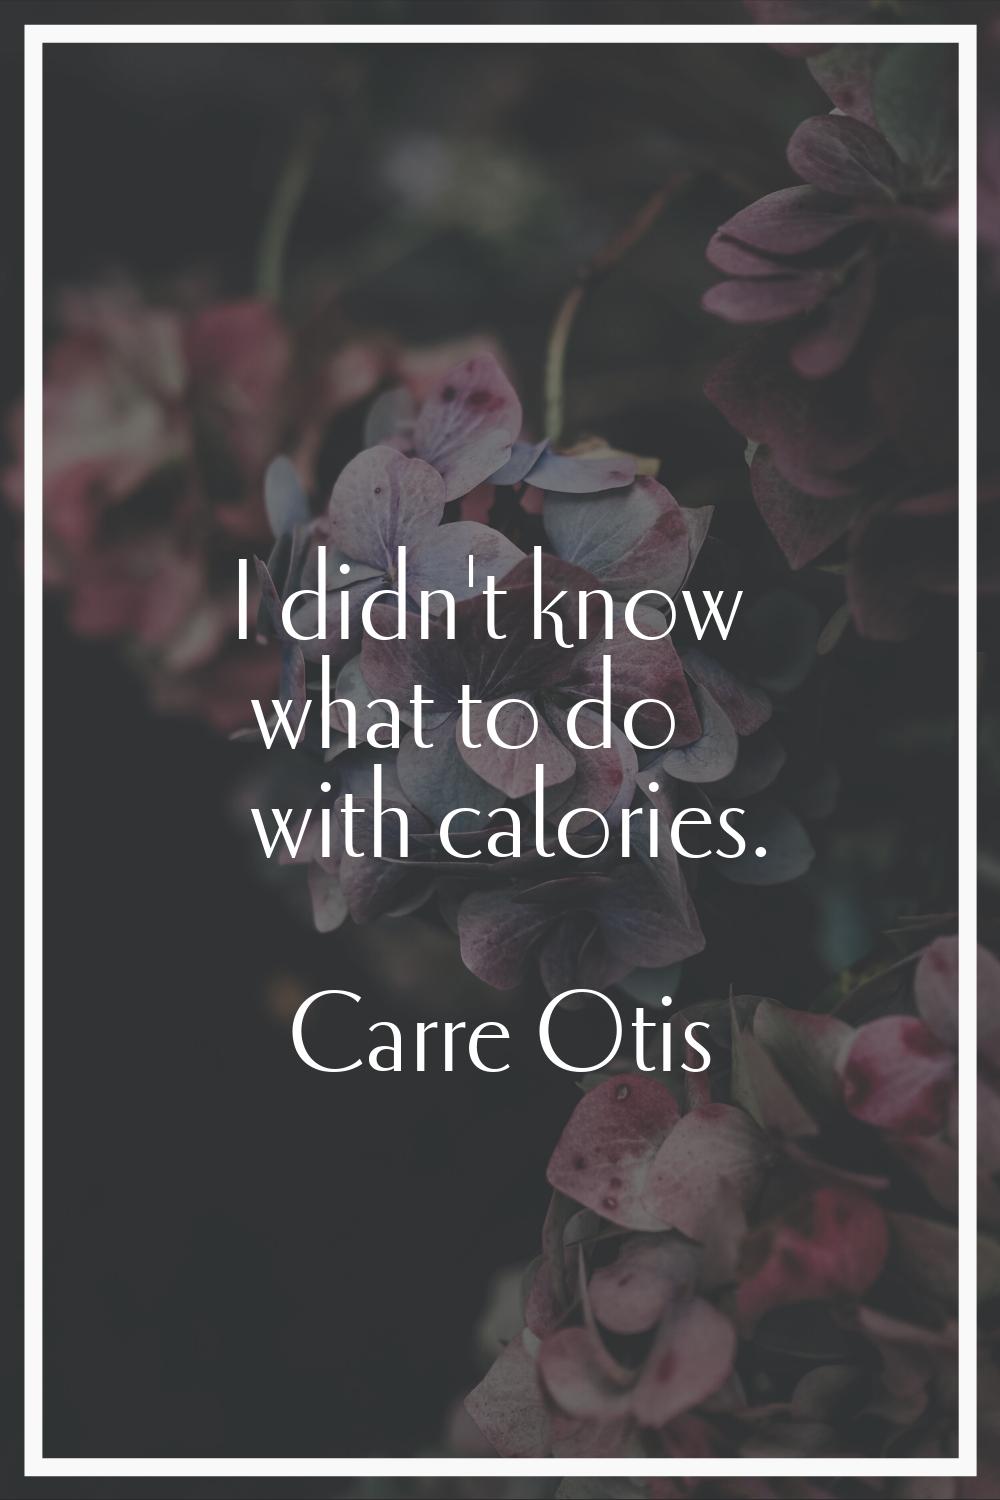 I didn't know what to do with calories.